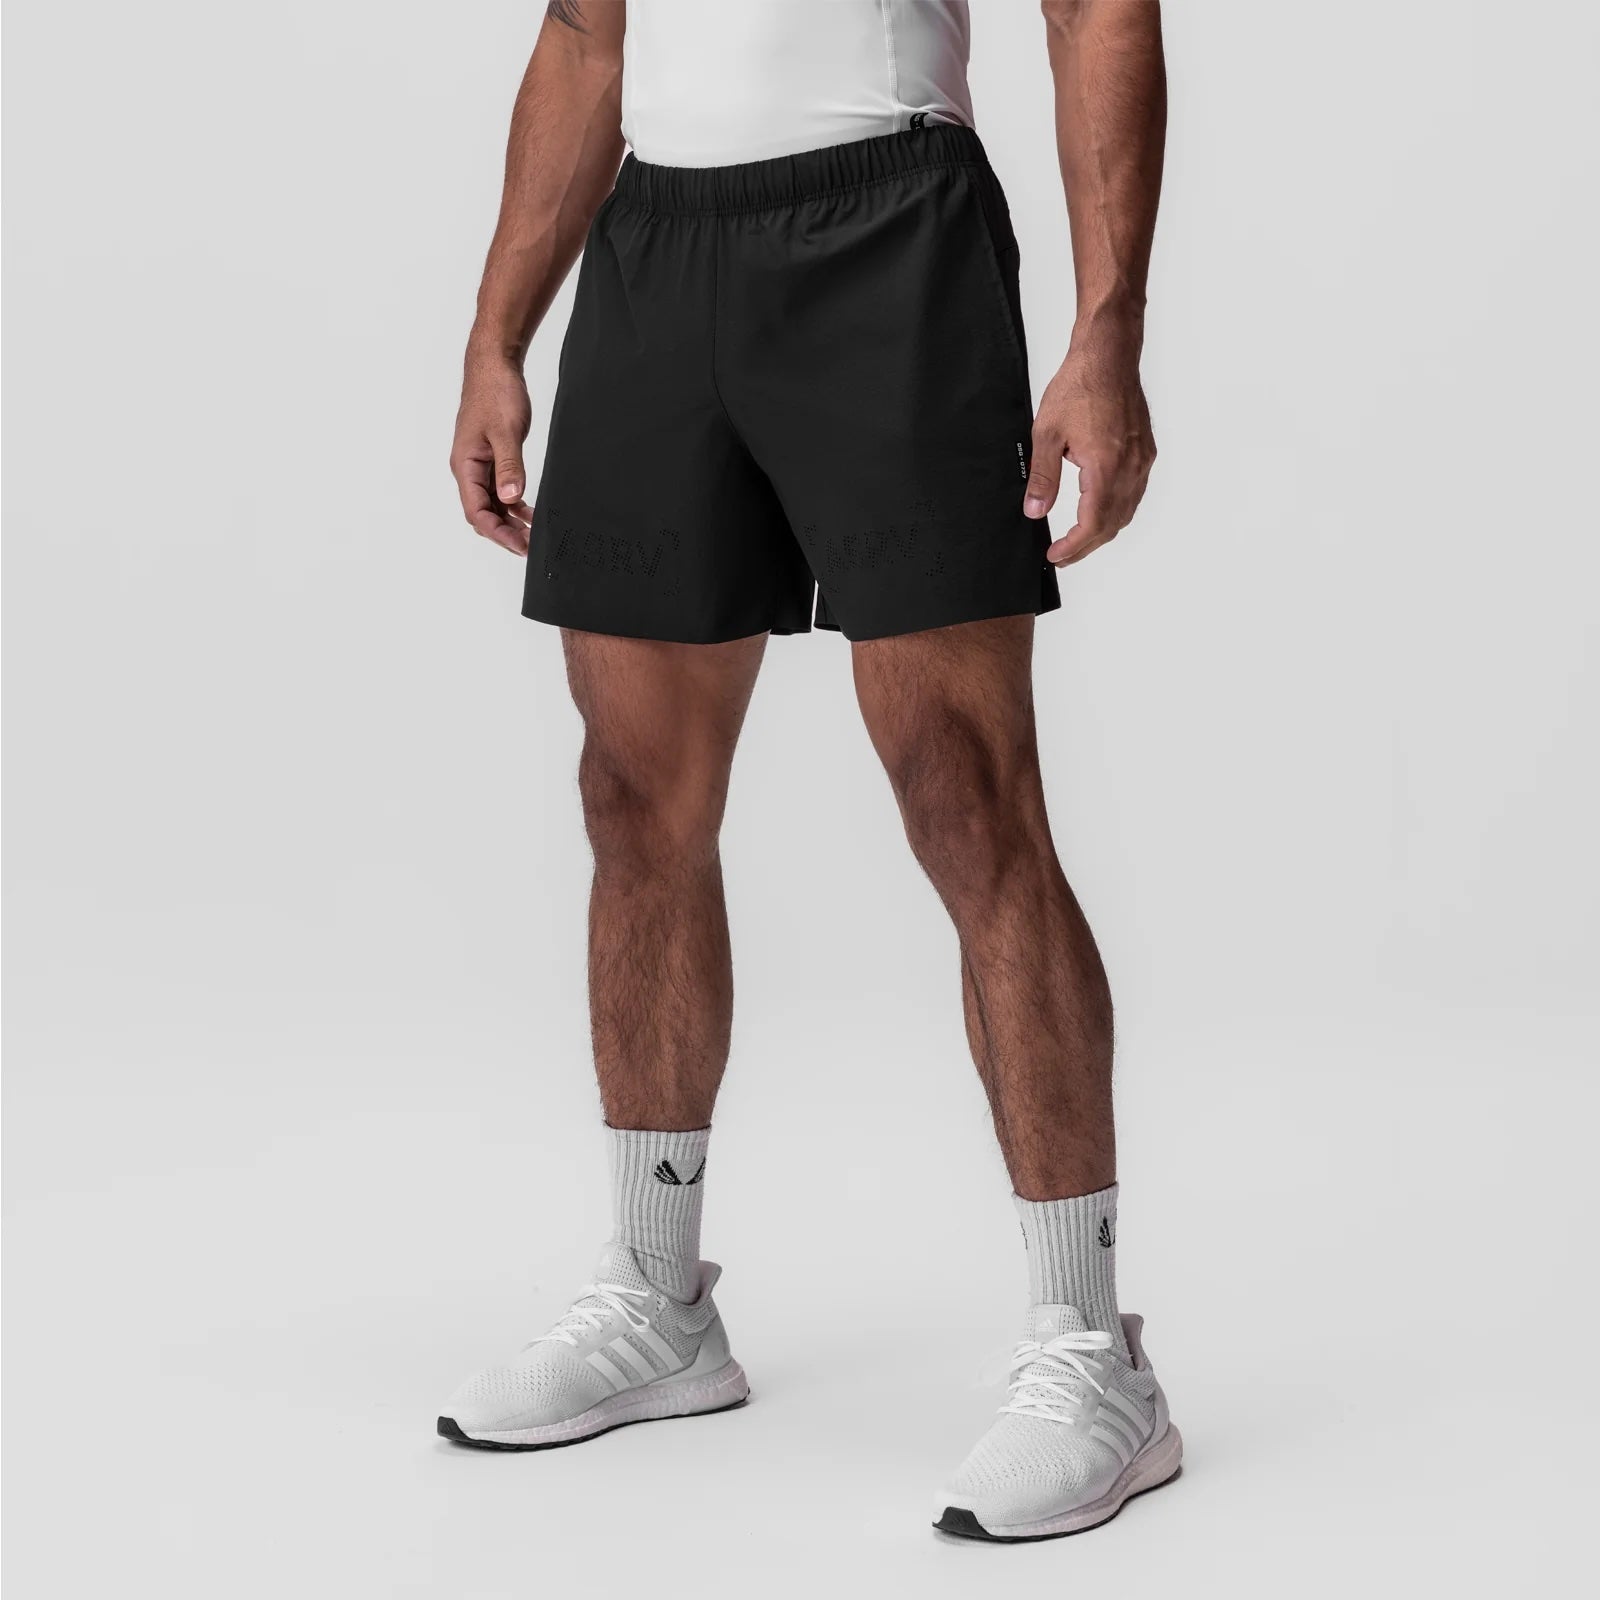 Ripstop 6" Perforated Shorts